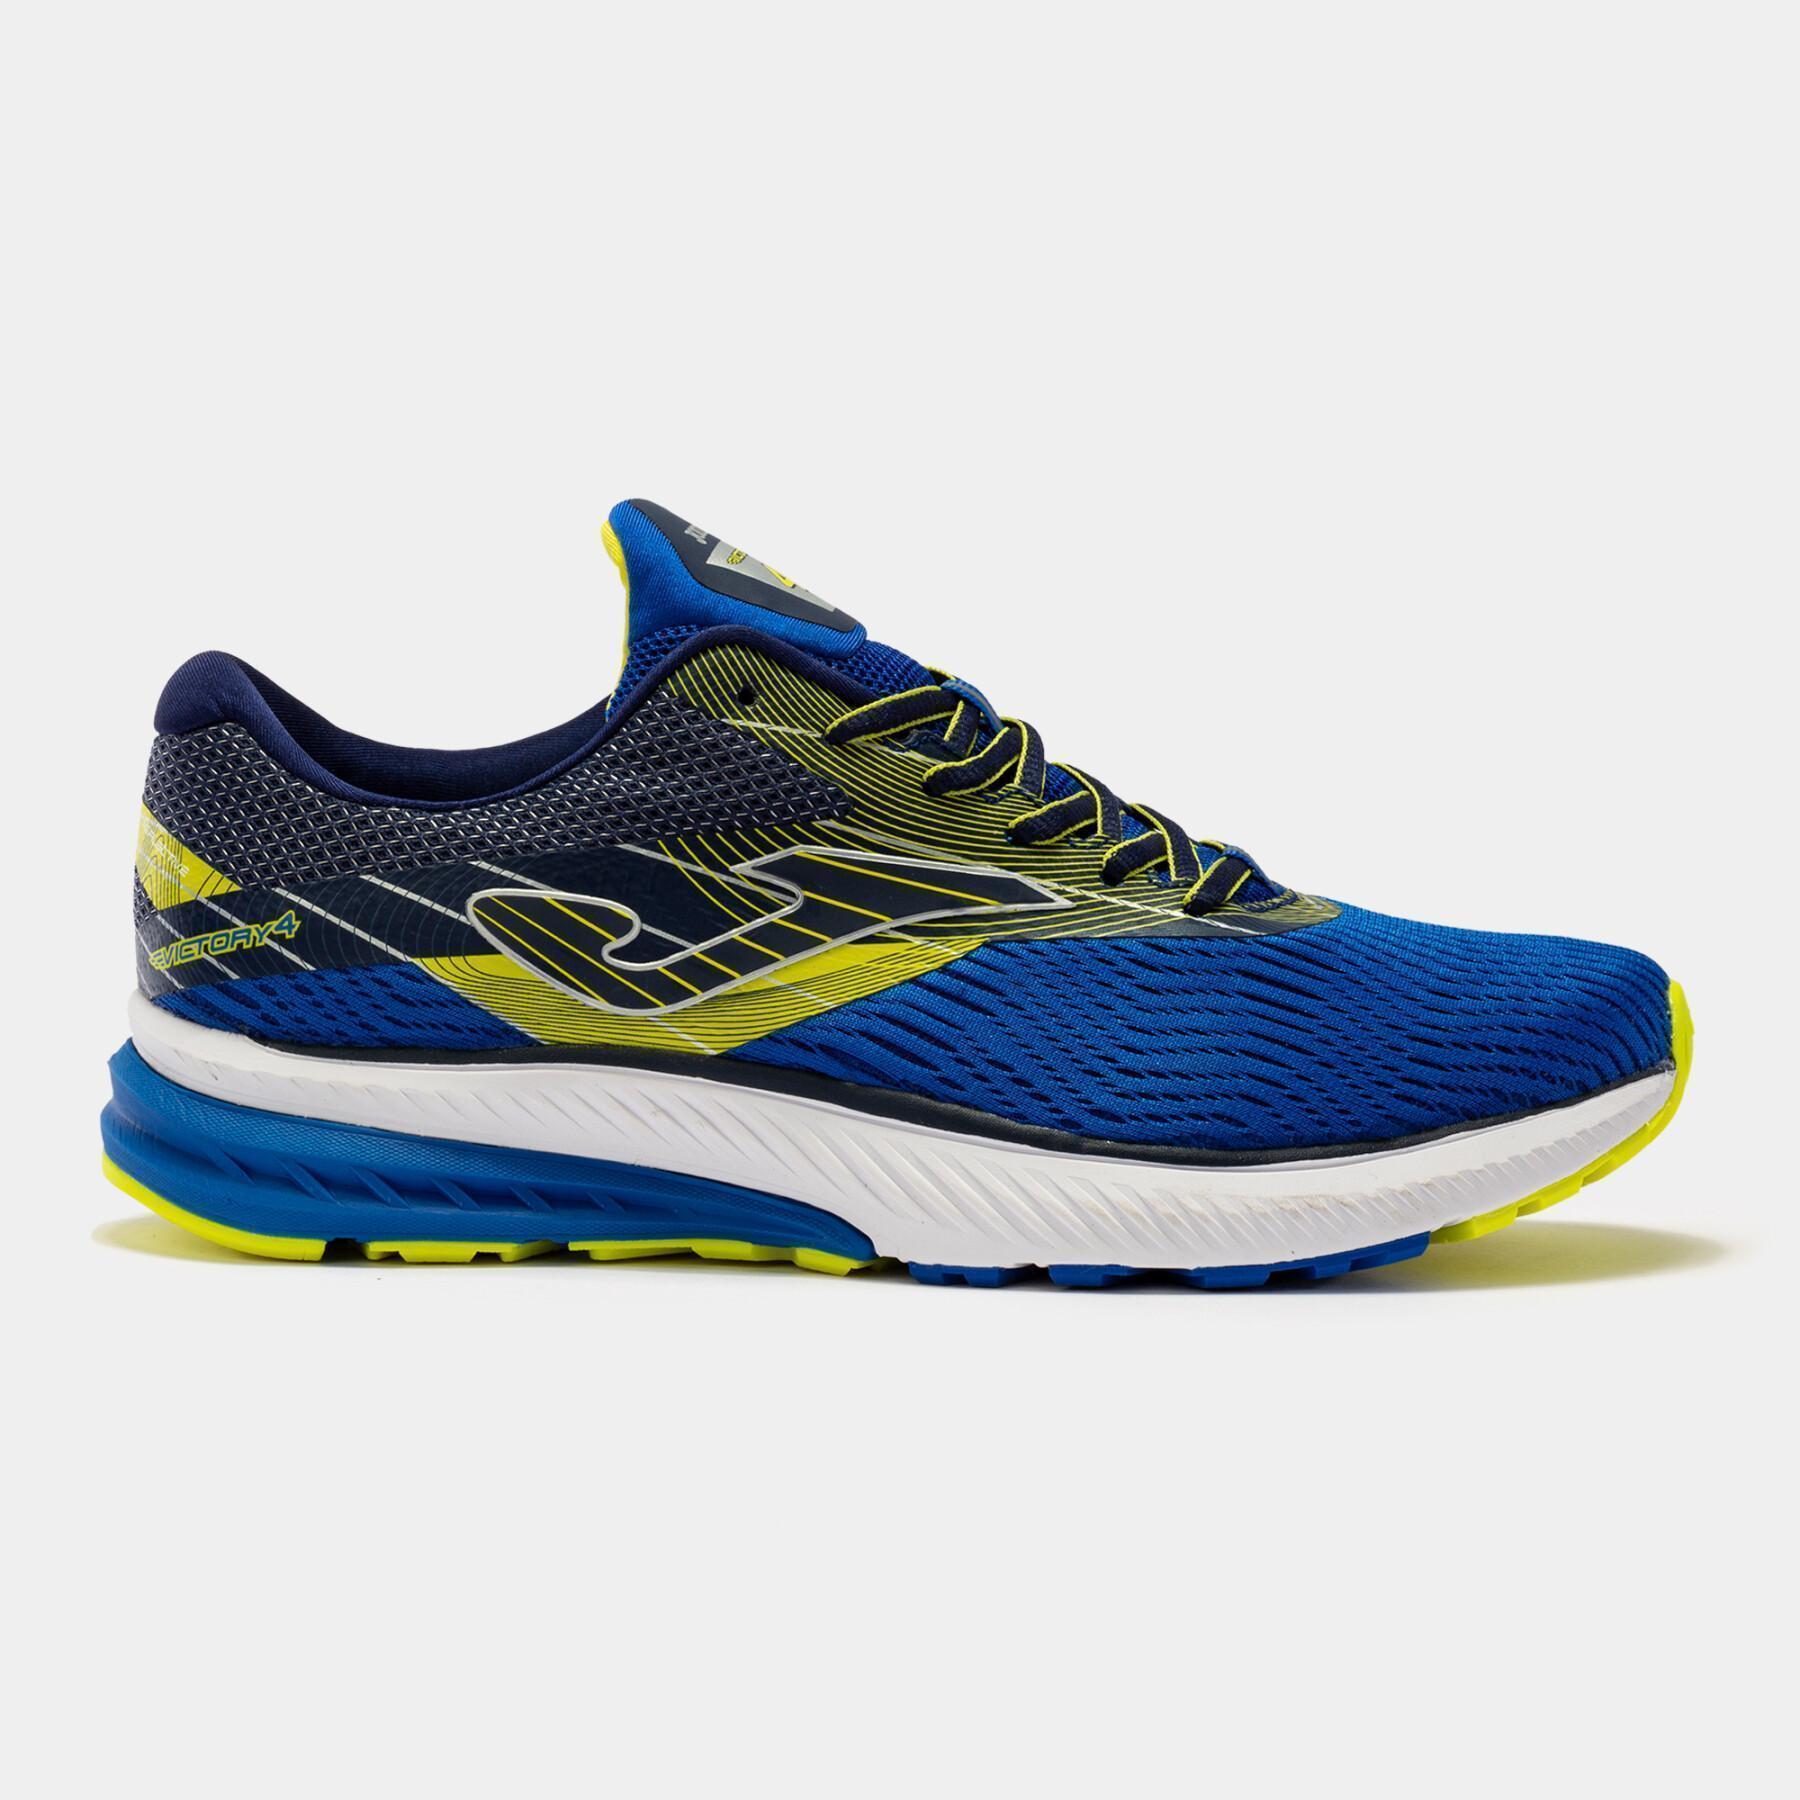 Chaussures de running Joma r.victory